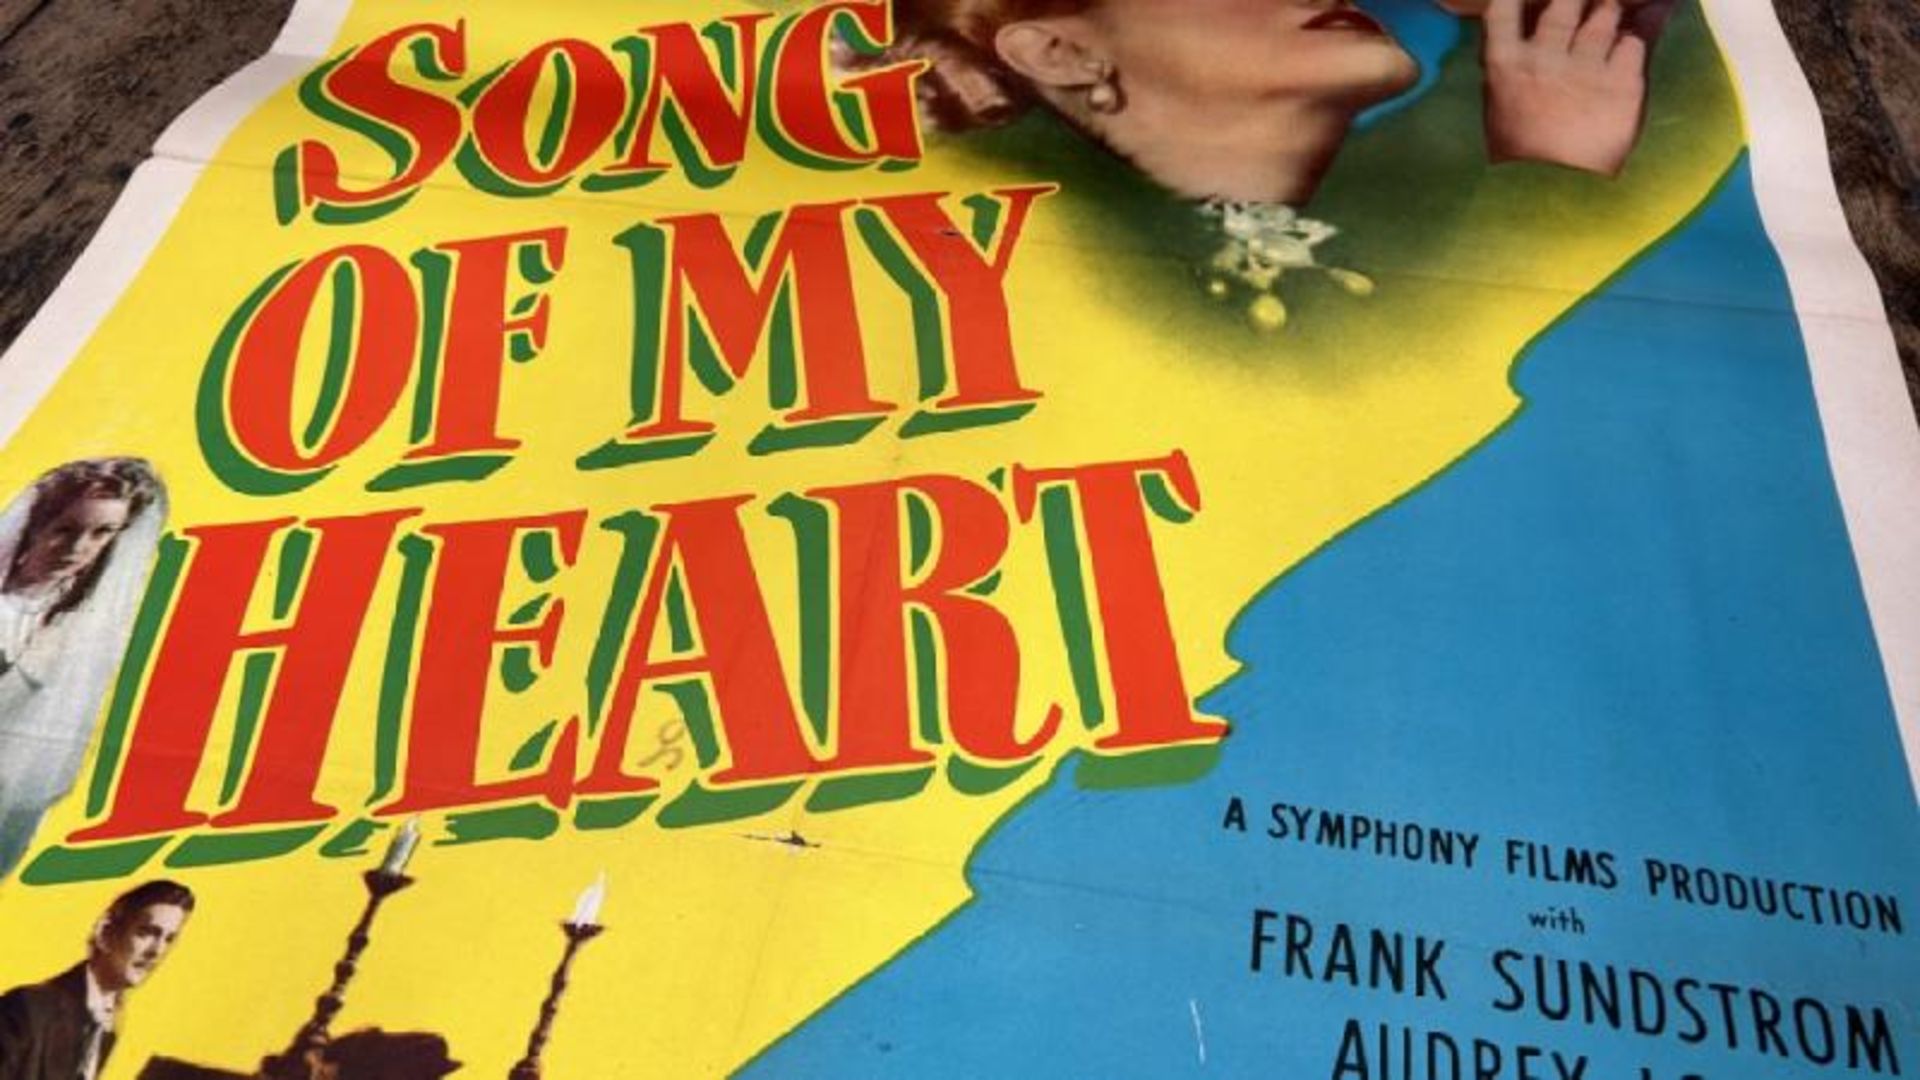 SONG OF MY HEART, ORIGINAL FILM POSTER, 69CM W X 104CM H - Image 3 of 4